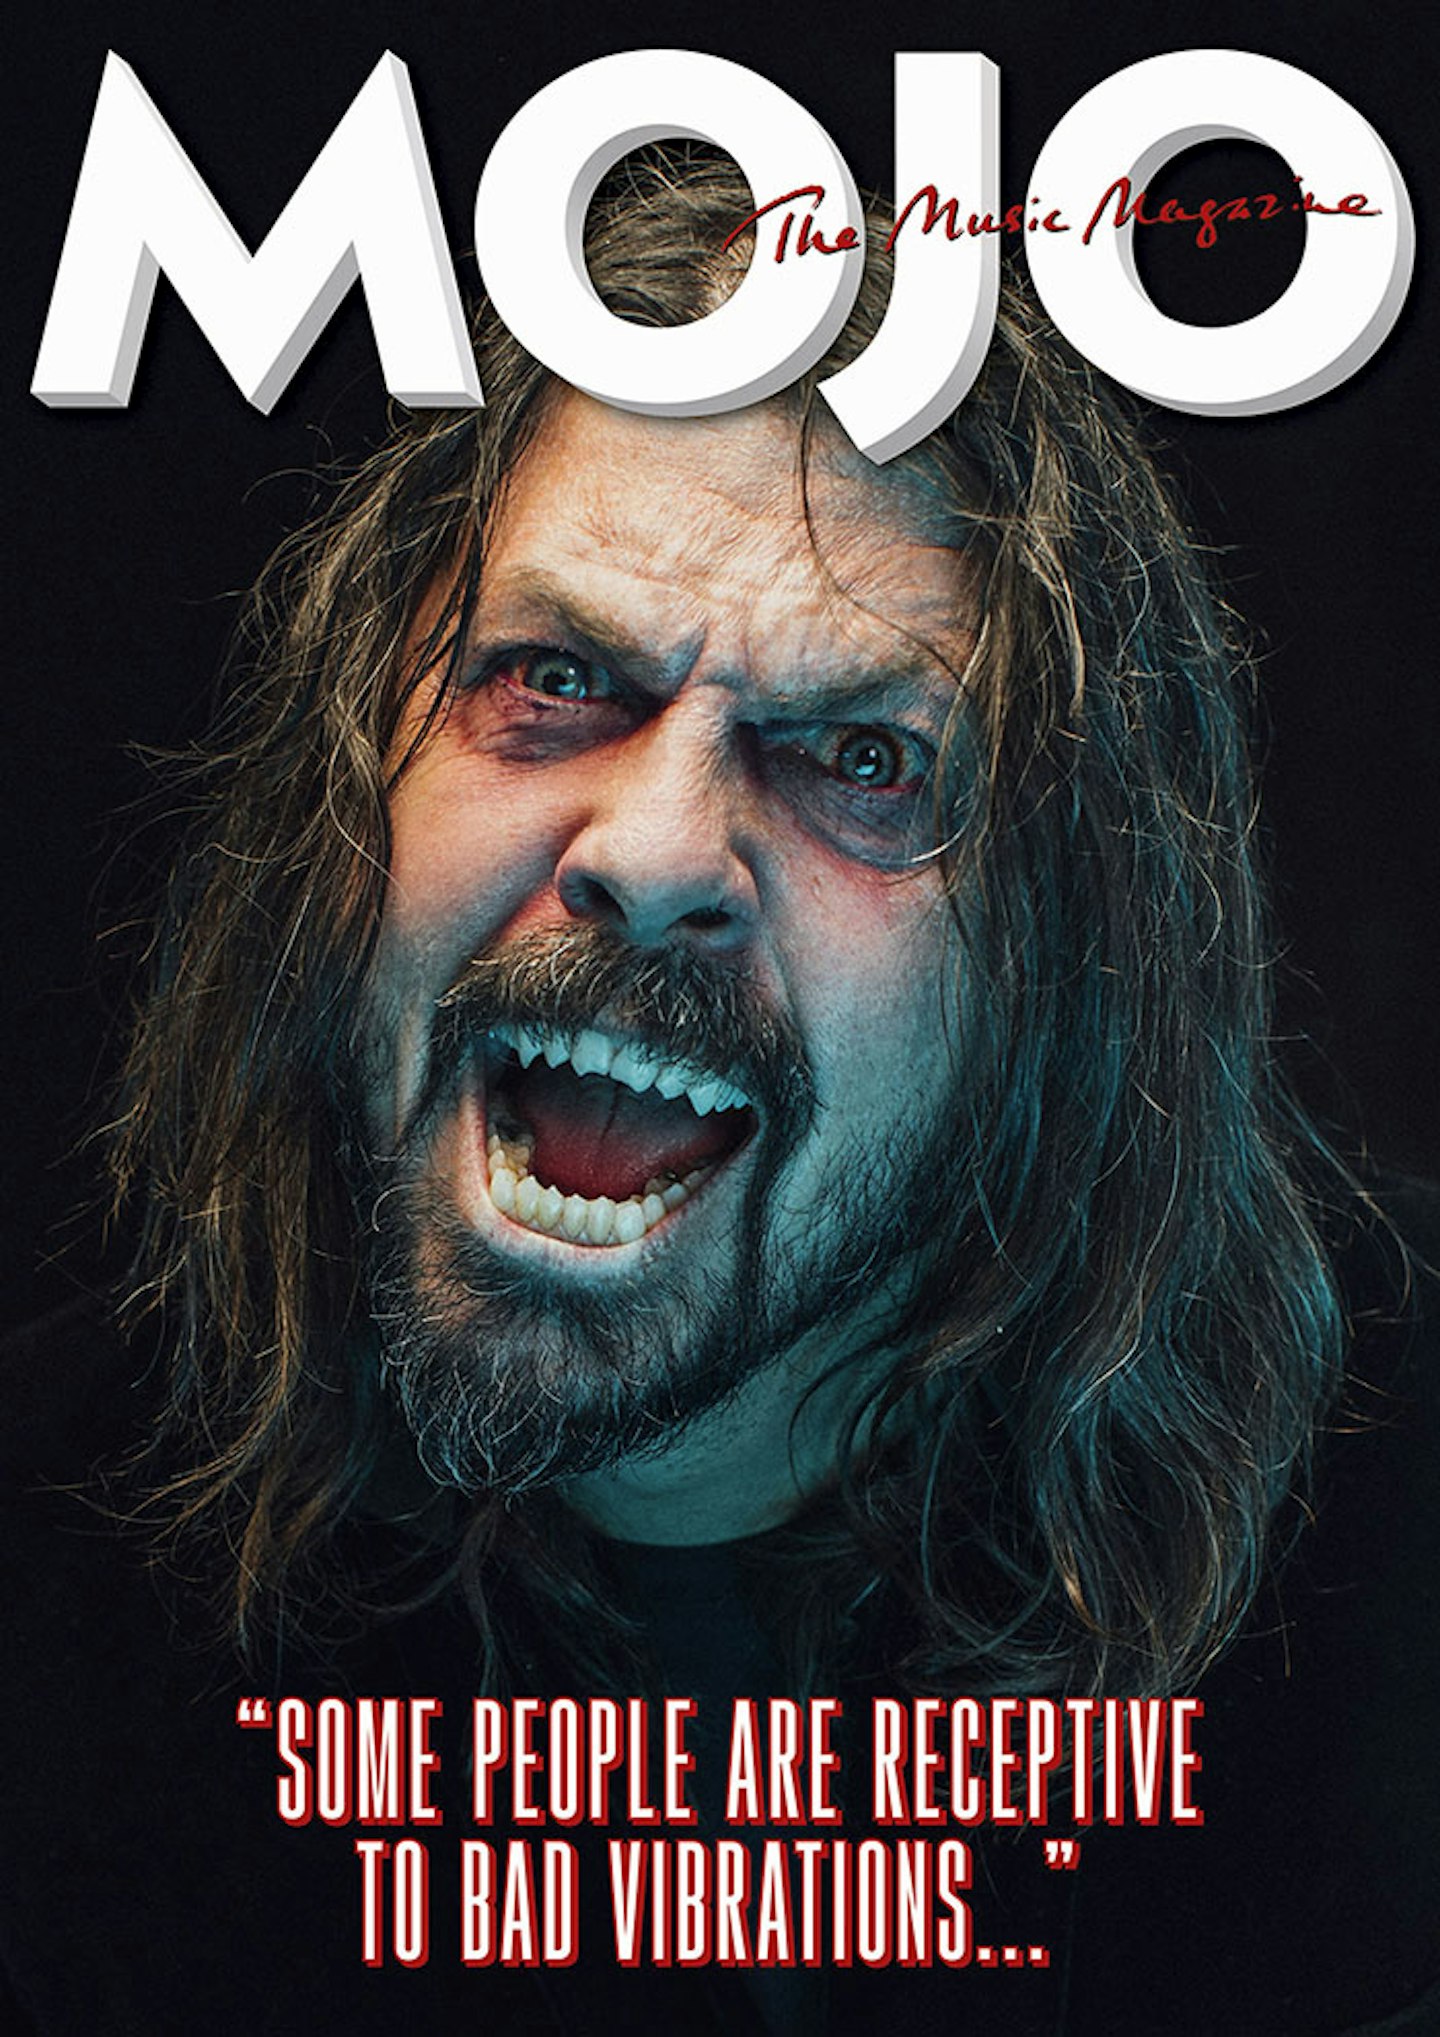 MOJO Magazine's limited edition Foo Fighters cover